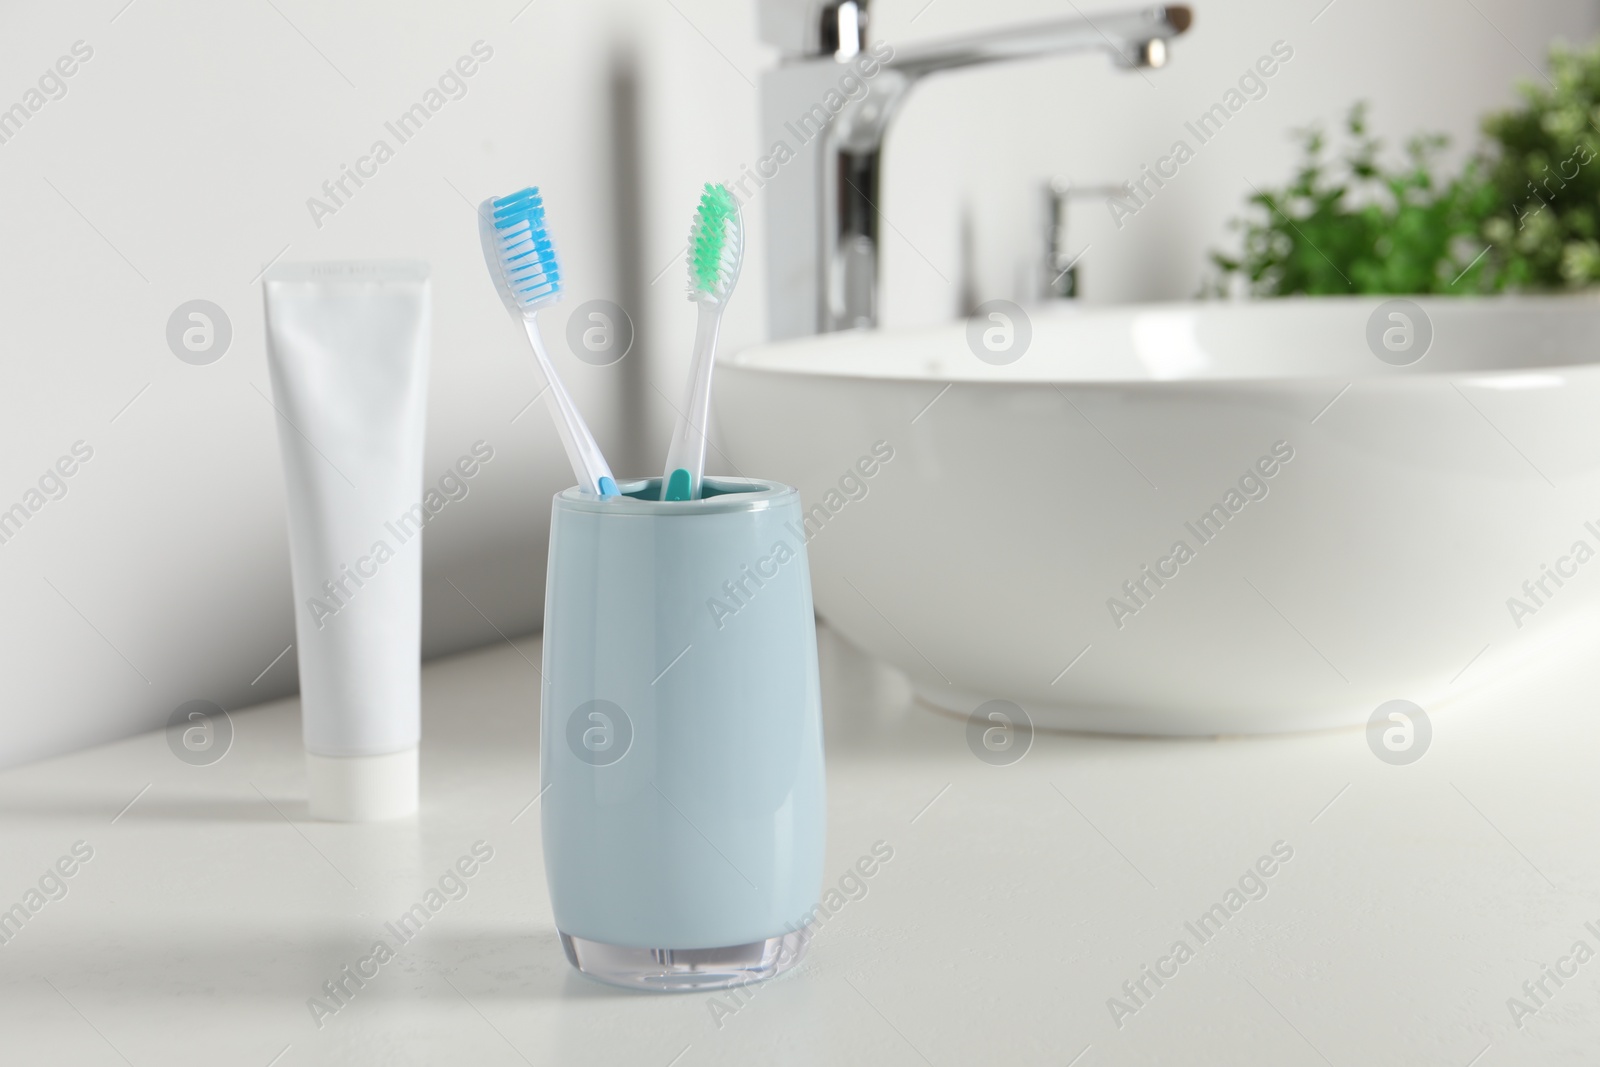 Photo of Plastic toothbrushes on white countertop in bathroom, space for text